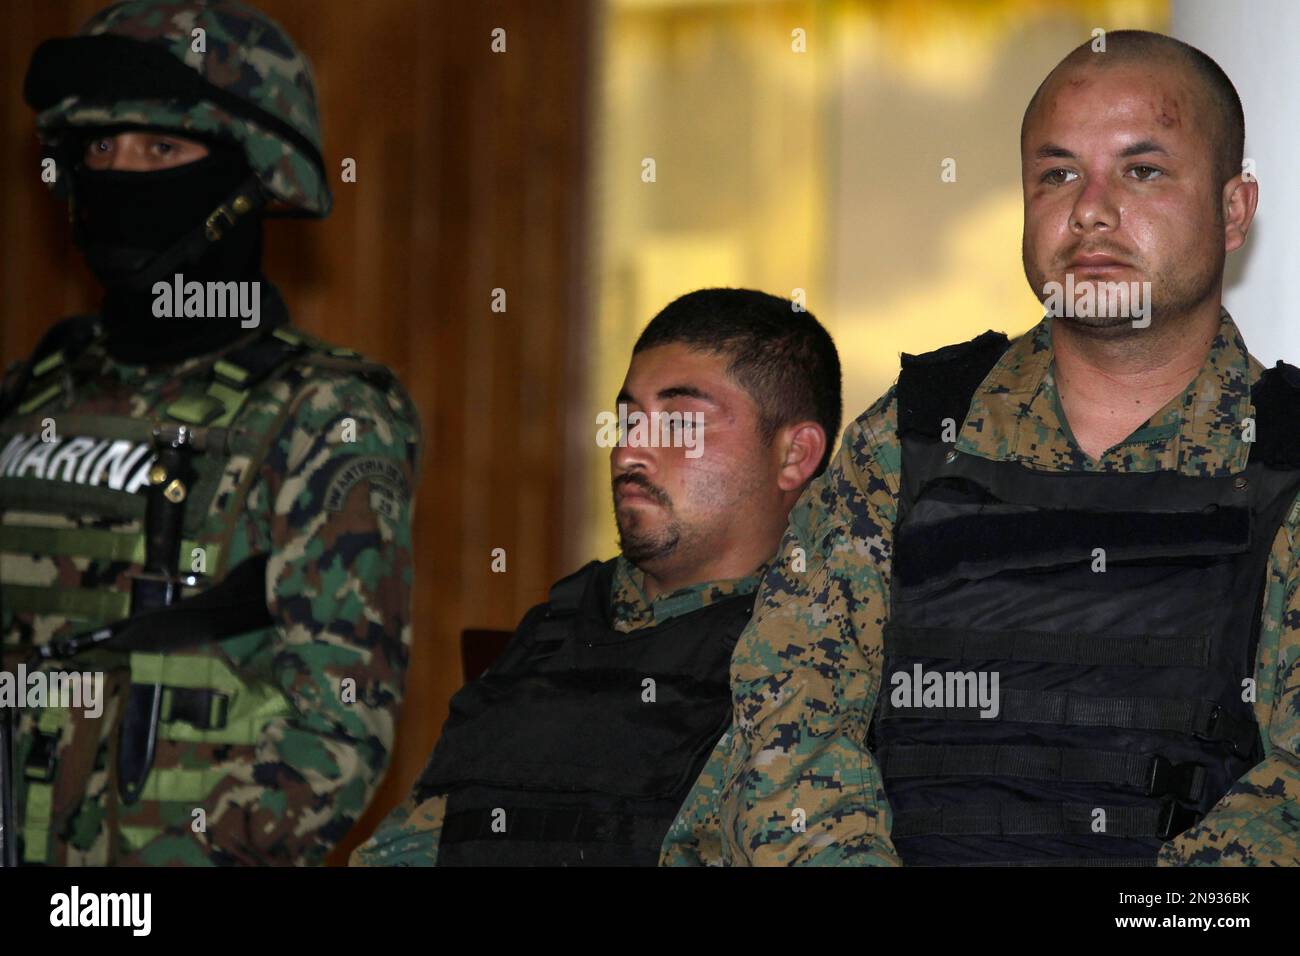 Two Men Wearing Bulletproof Vests And Camouflage Military Fatigues And Believed To Be Bodyguards 9267